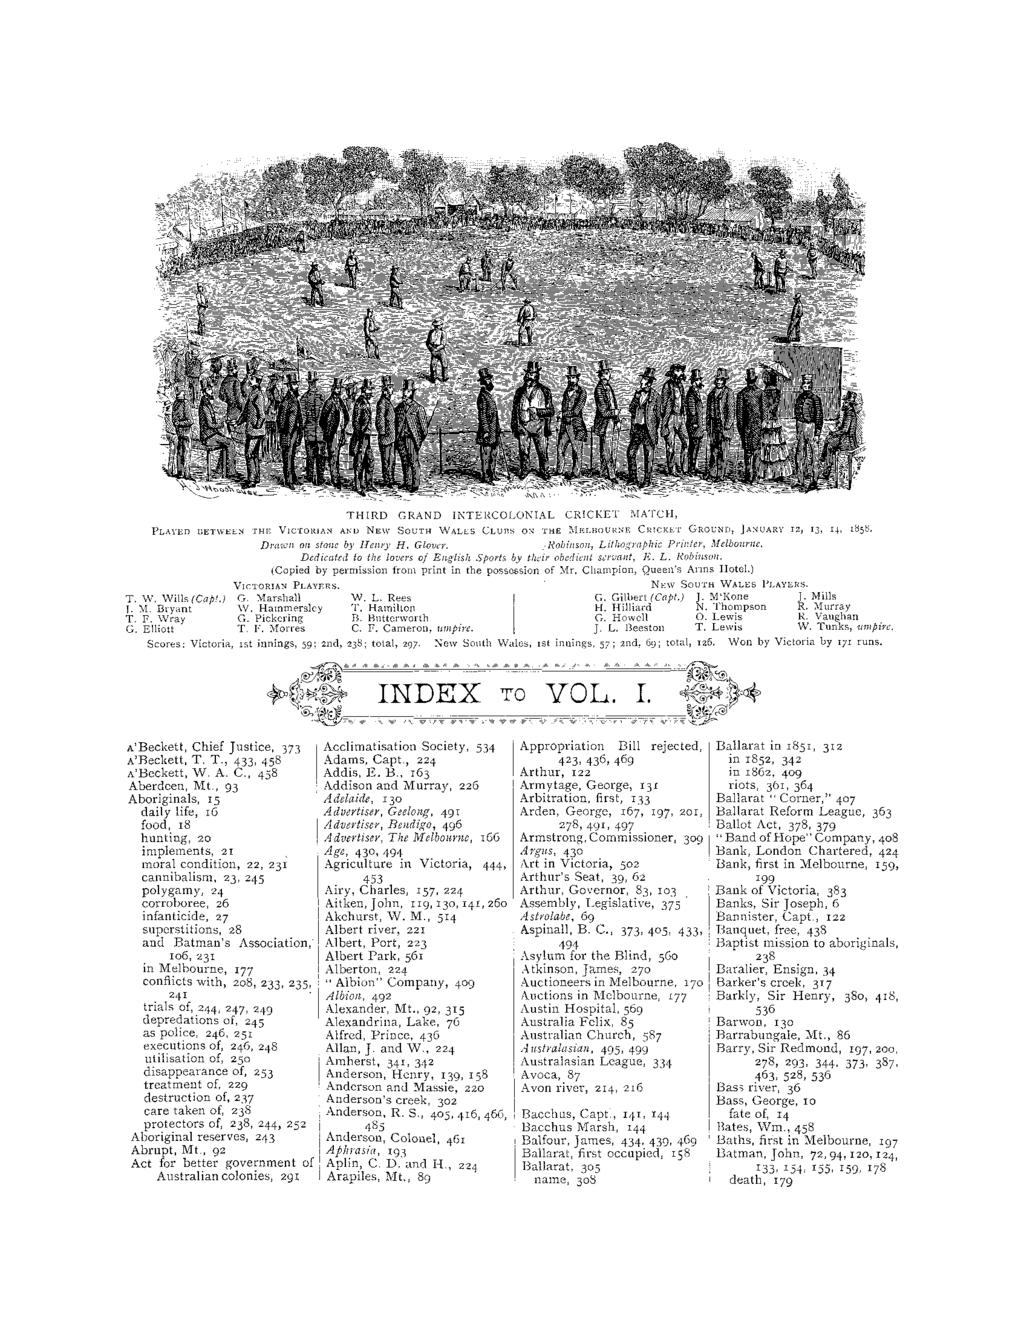 THIRD GRAND INTERCOLONIAL CRICKET MATCH, PLAYED BETWEEN THE VICTORIAN AND NEW SOUTH WALES CLUBS ON THE MELBOURNE CRICKET GROUND, JANUARY 52, 13, I, 1858. Drawn on stone by Henry H. Glover.